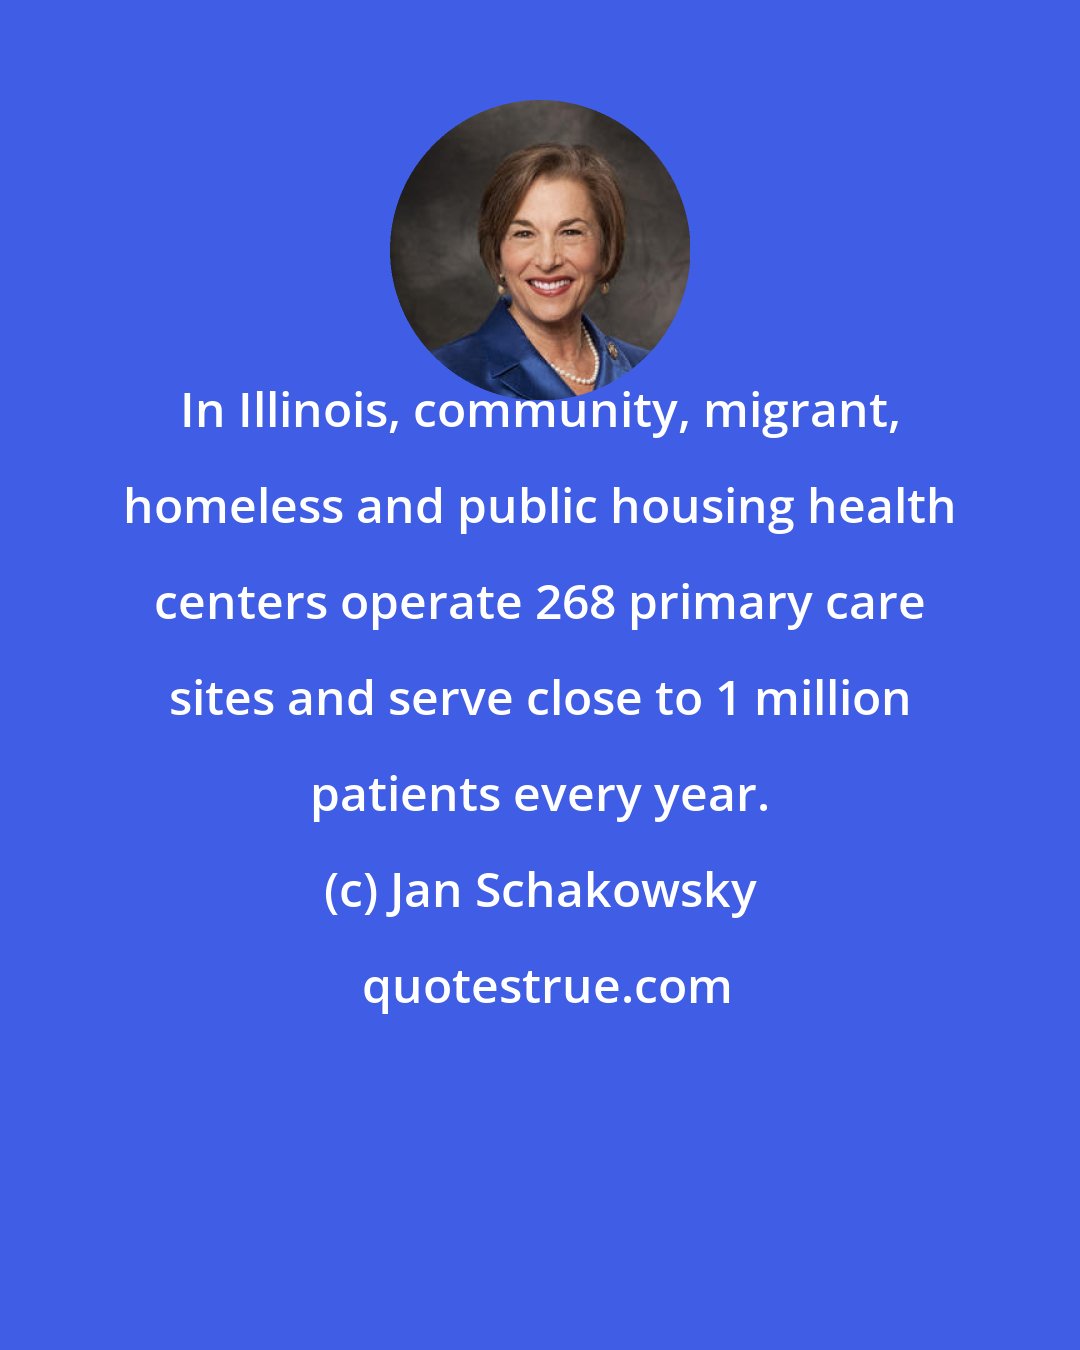 Jan Schakowsky: In Illinois, community, migrant, homeless and public housing health centers operate 268 primary care sites and serve close to 1 million patients every year.